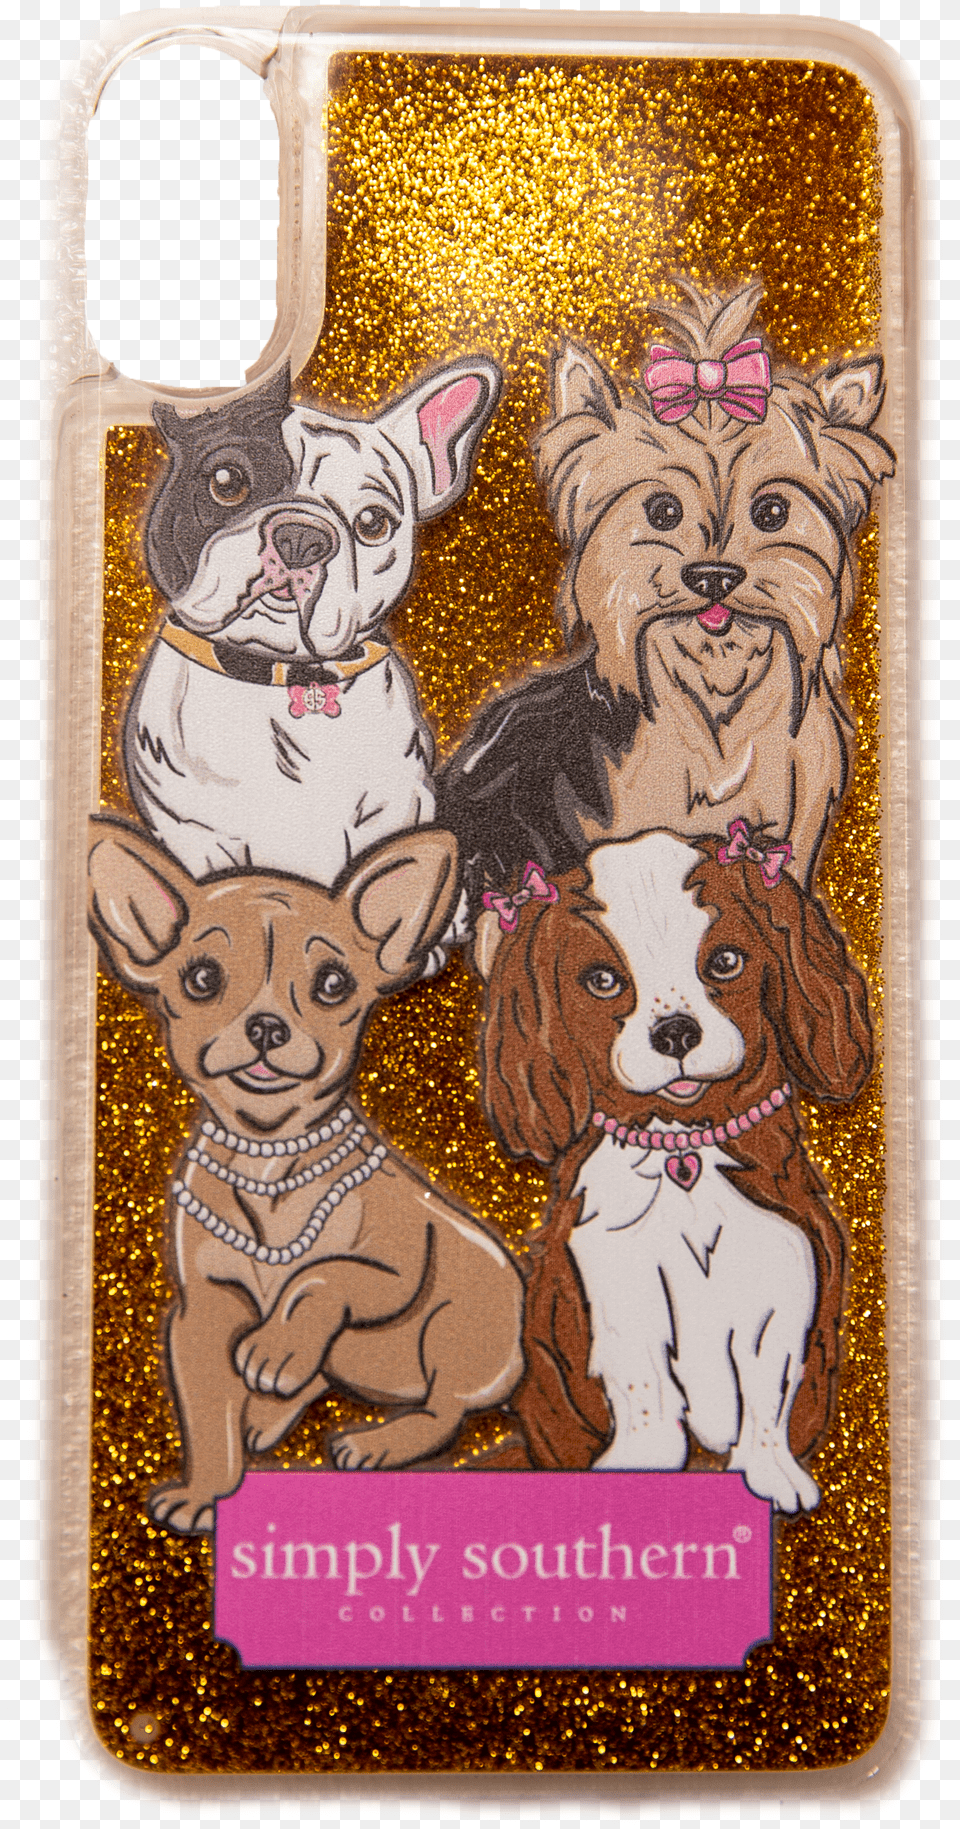 Dog Gold Glitter Phone Caseclass Lazyload Lazyload Cartoon Free Png Download